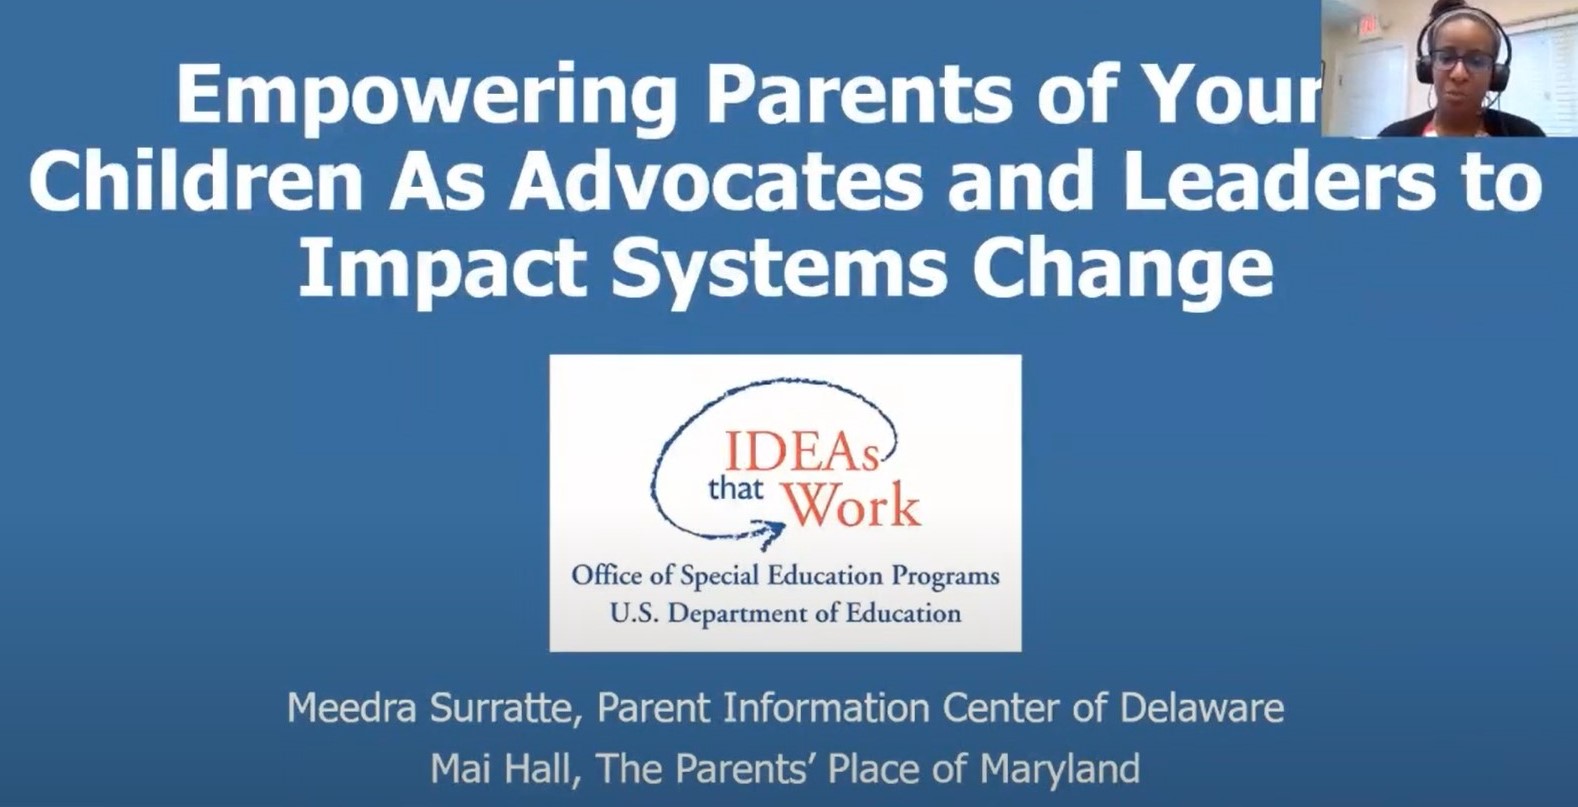 Empowering Parents of Young Children as Advocates and Leaders to Impact System Change